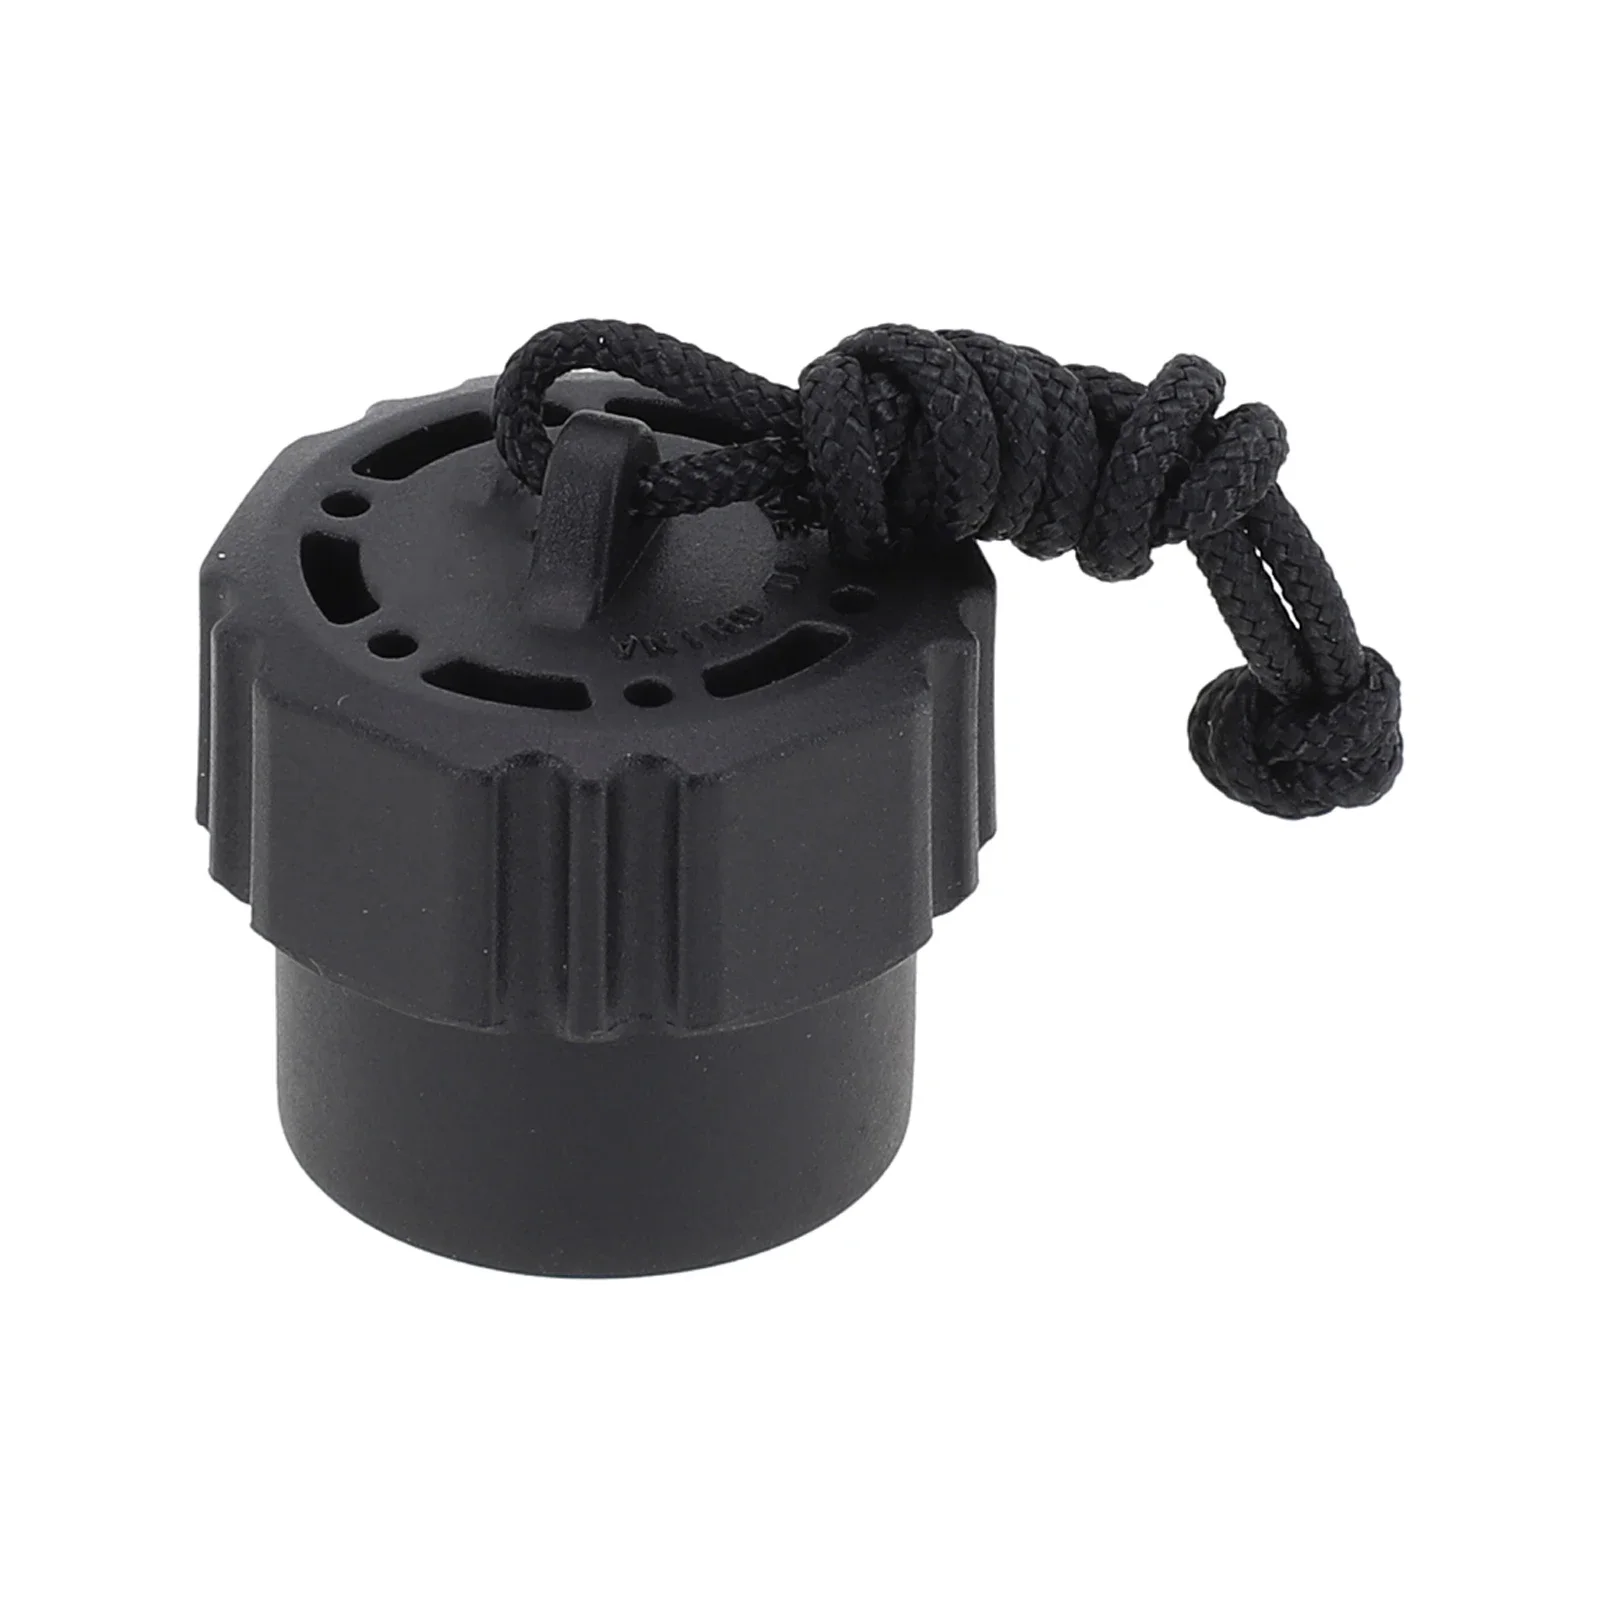 Scuba Diving Regulator First Stage DIN Dust-Cap Protector Covers Tank Valve Plug Pressure Reducing Valve Thread Protection Cover